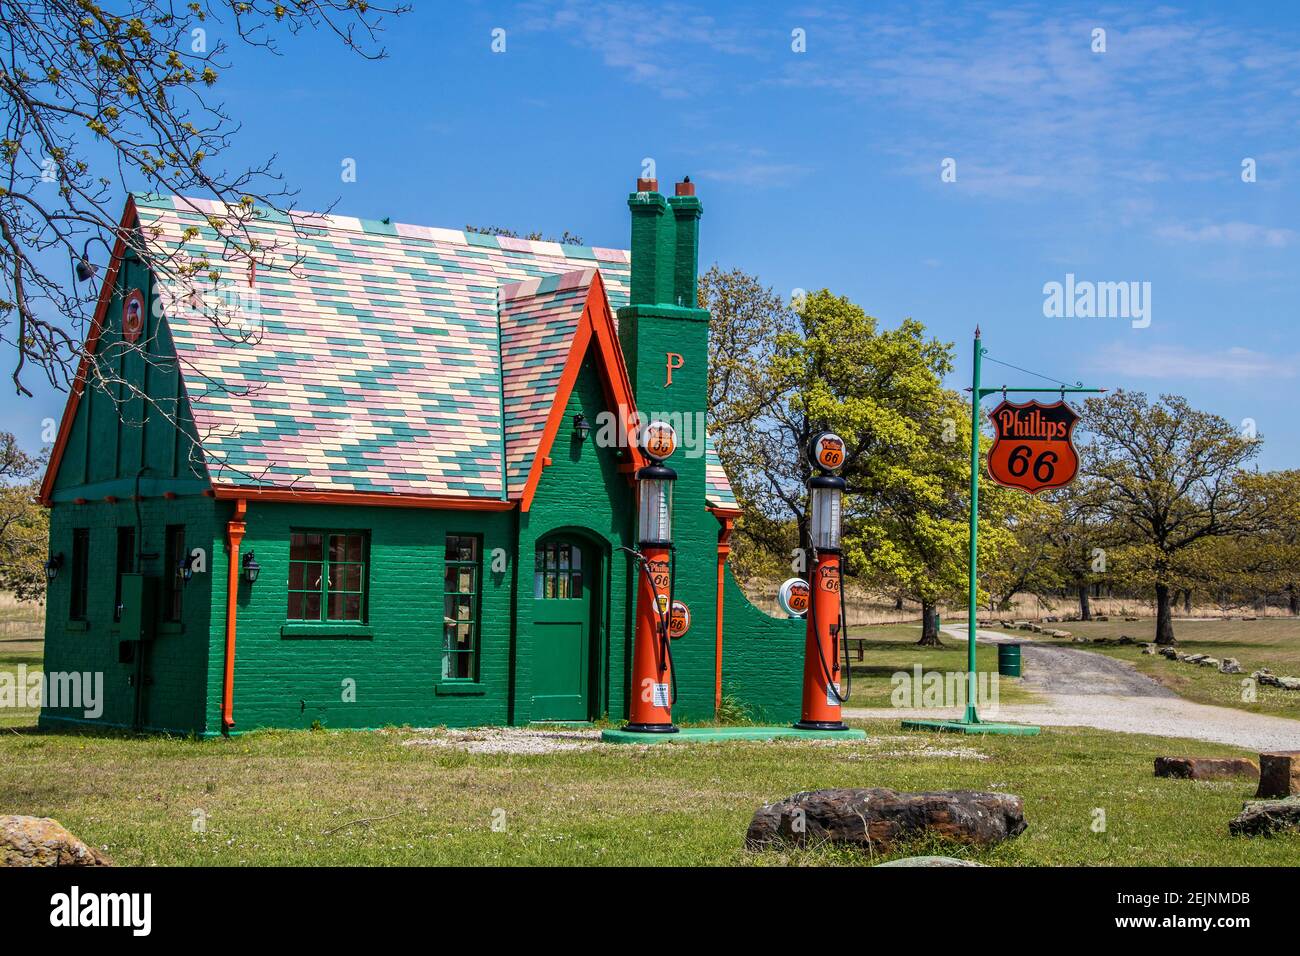 05-14-2020 Cushing OK USA - Colorful Retro Phillips  66 Gas Station surrounded by trees with old time signs and pumps Stock Photo